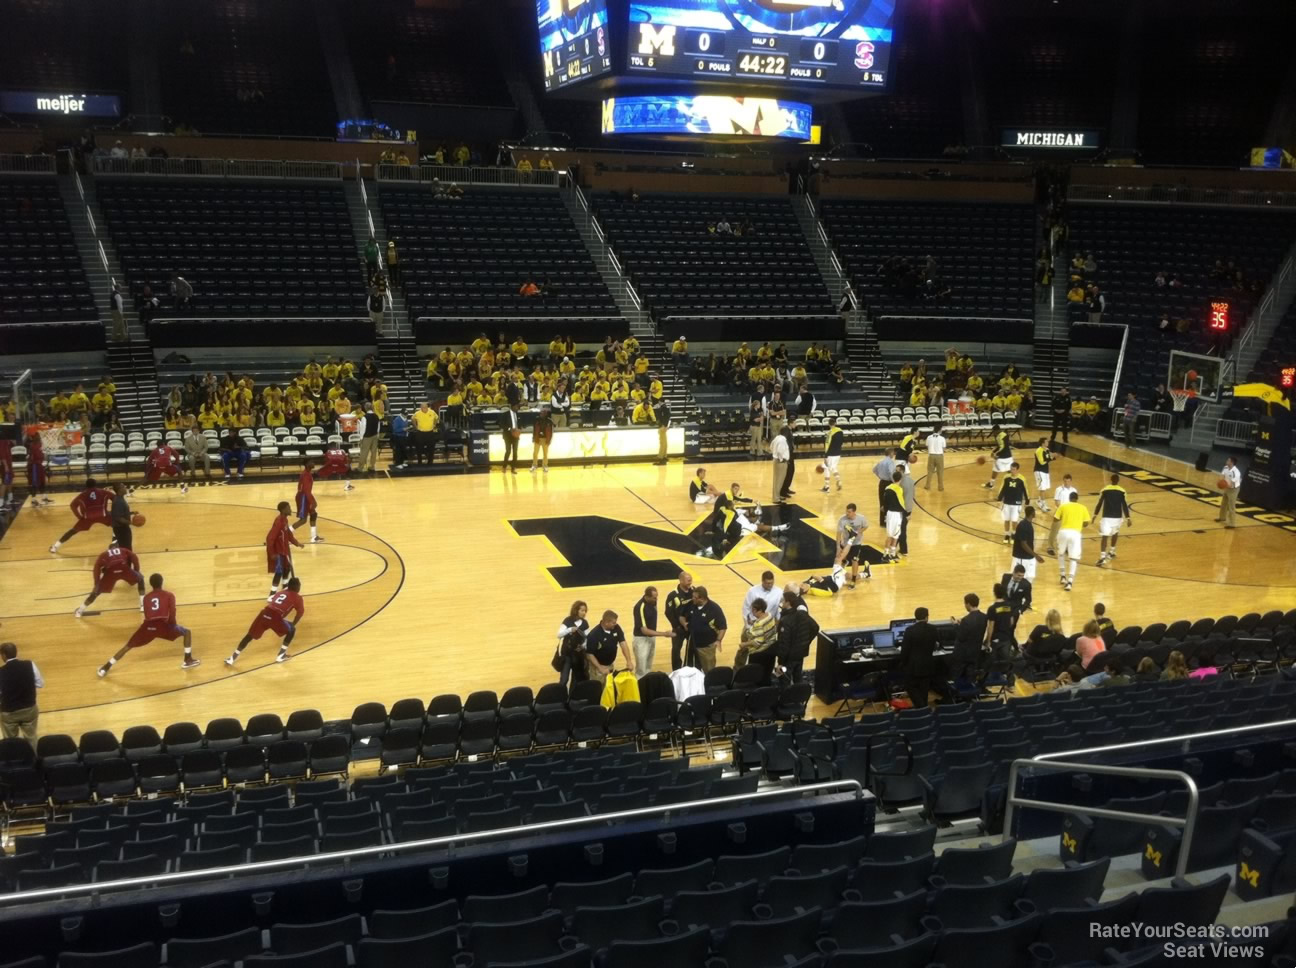 section 106, row 16 seat view  - crisler center